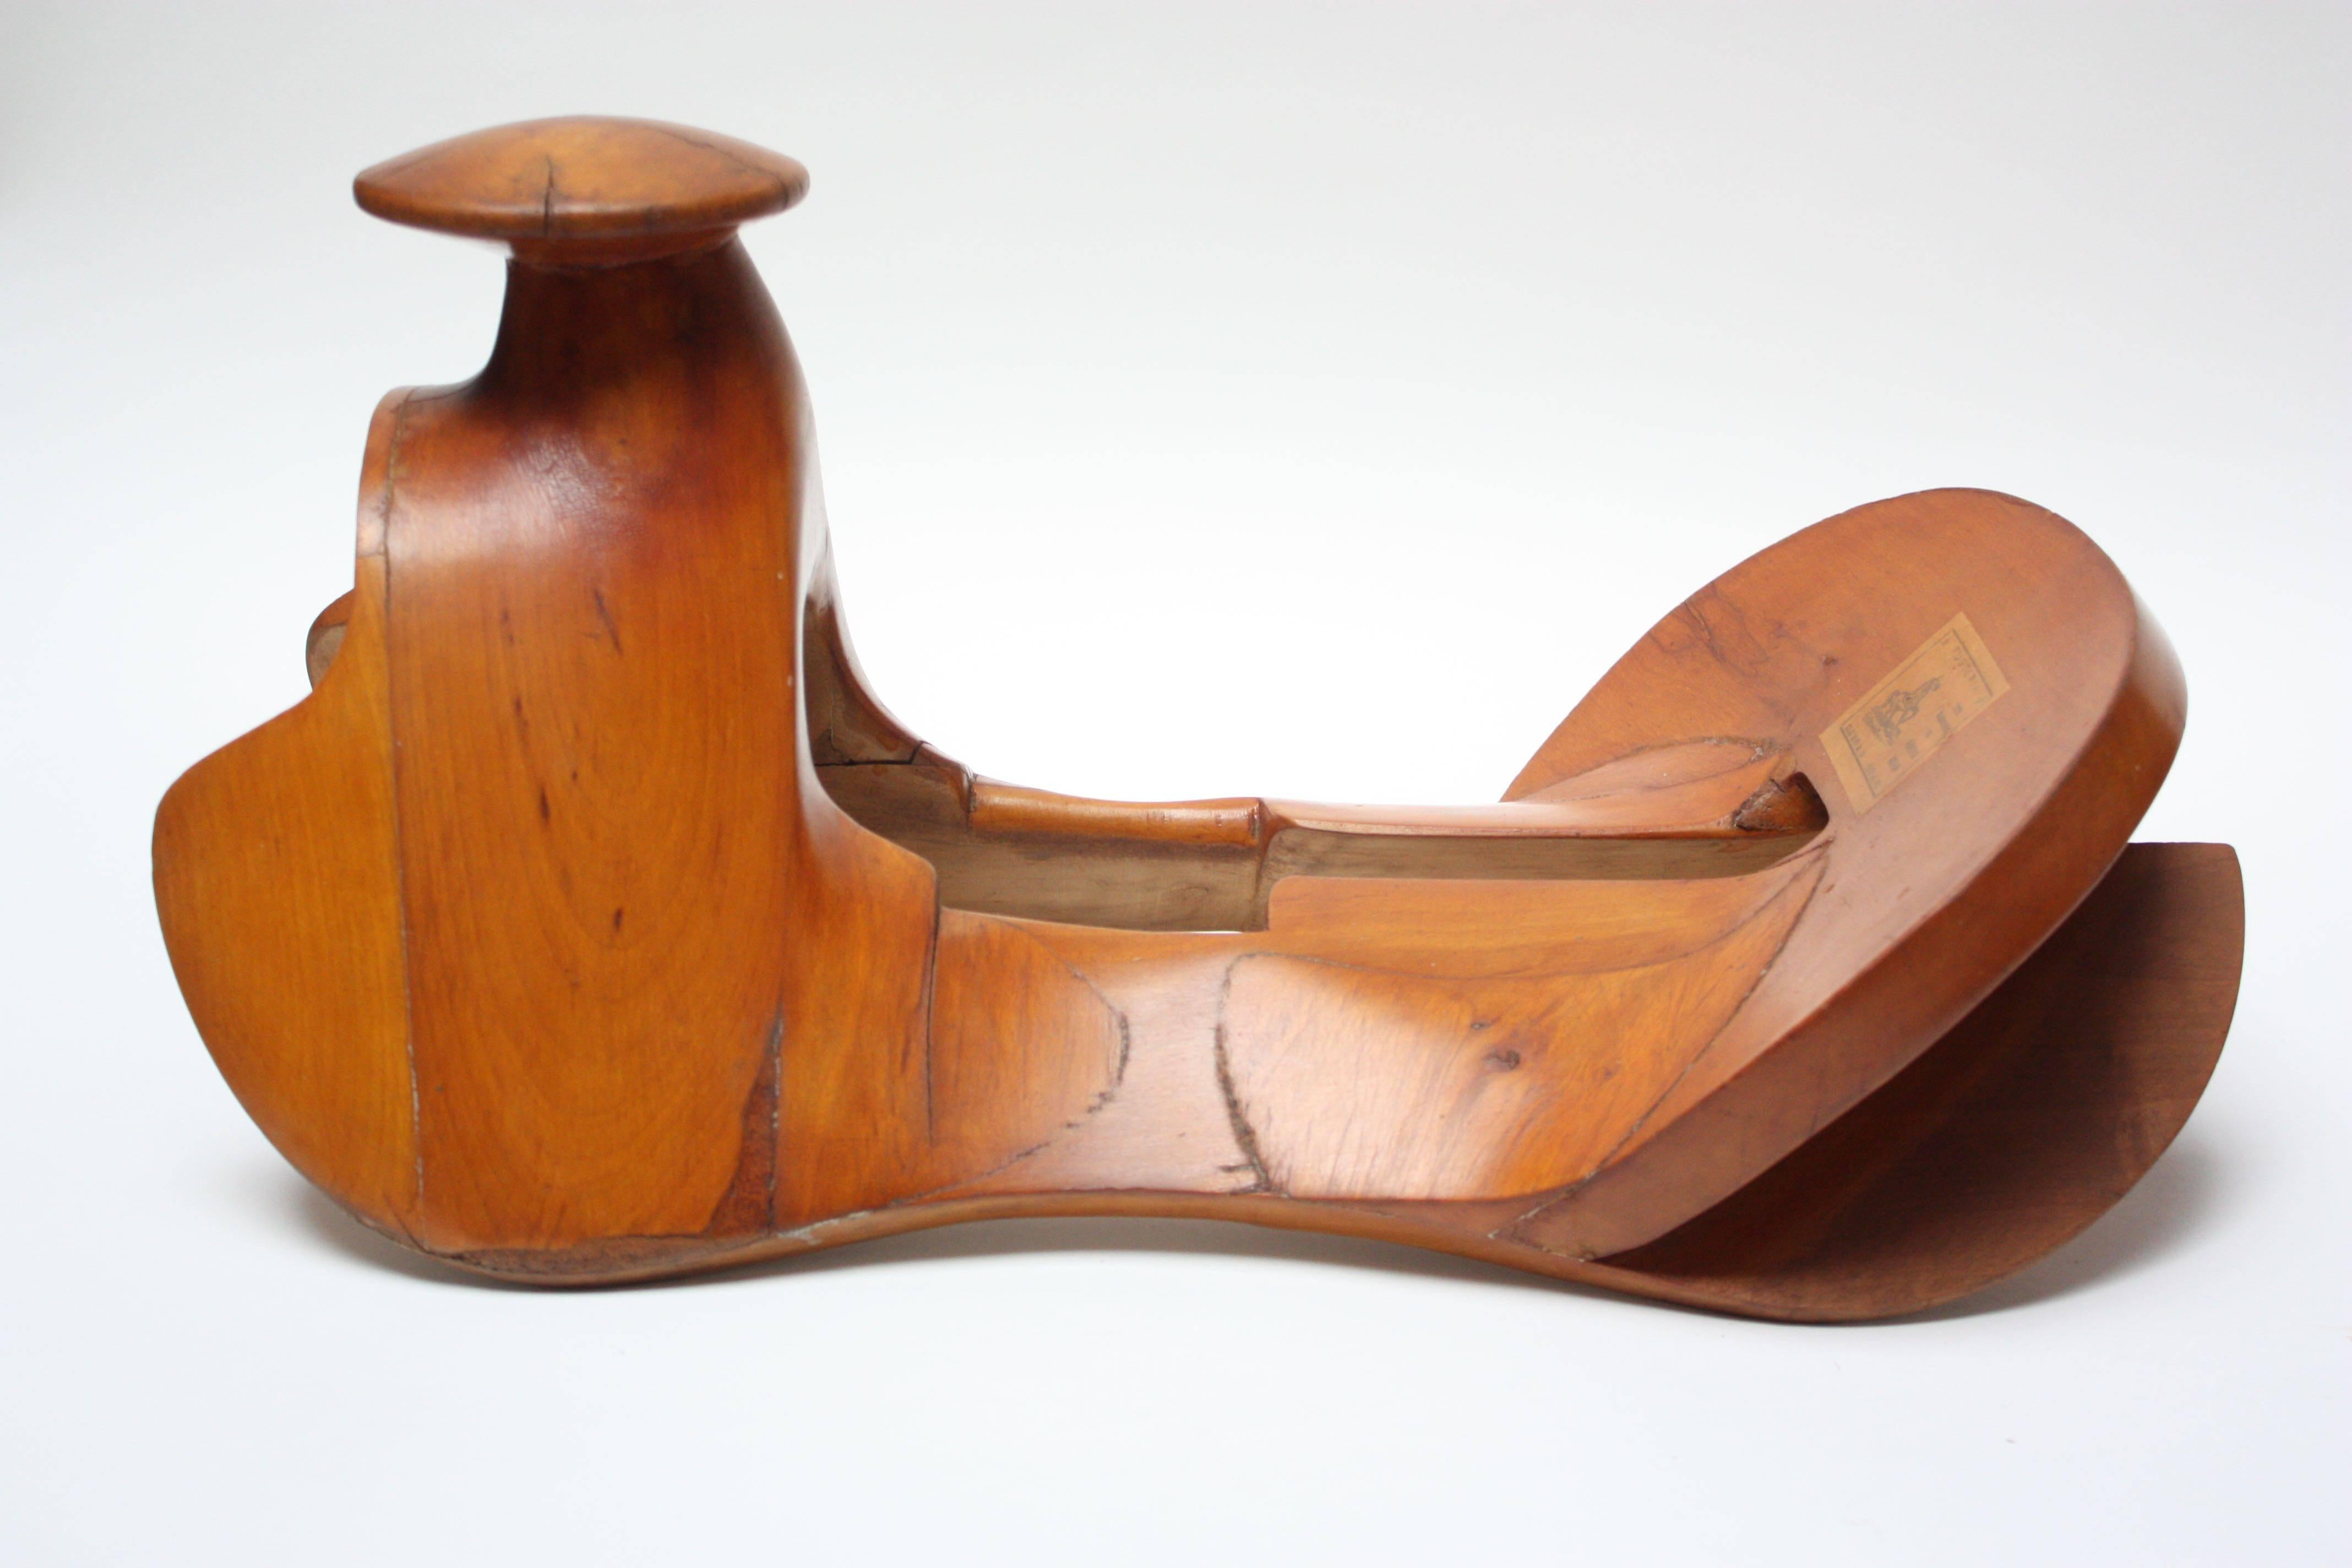 Saddle tree / saddle base (circa 1970s, Teziutlan Mexico) composed of carved cherrywood. Known as a 'charro' saddle tree after the Mexican horsemen 'charros' who used this style of saddle characterized by its wider seat and larger Horn. 
Works